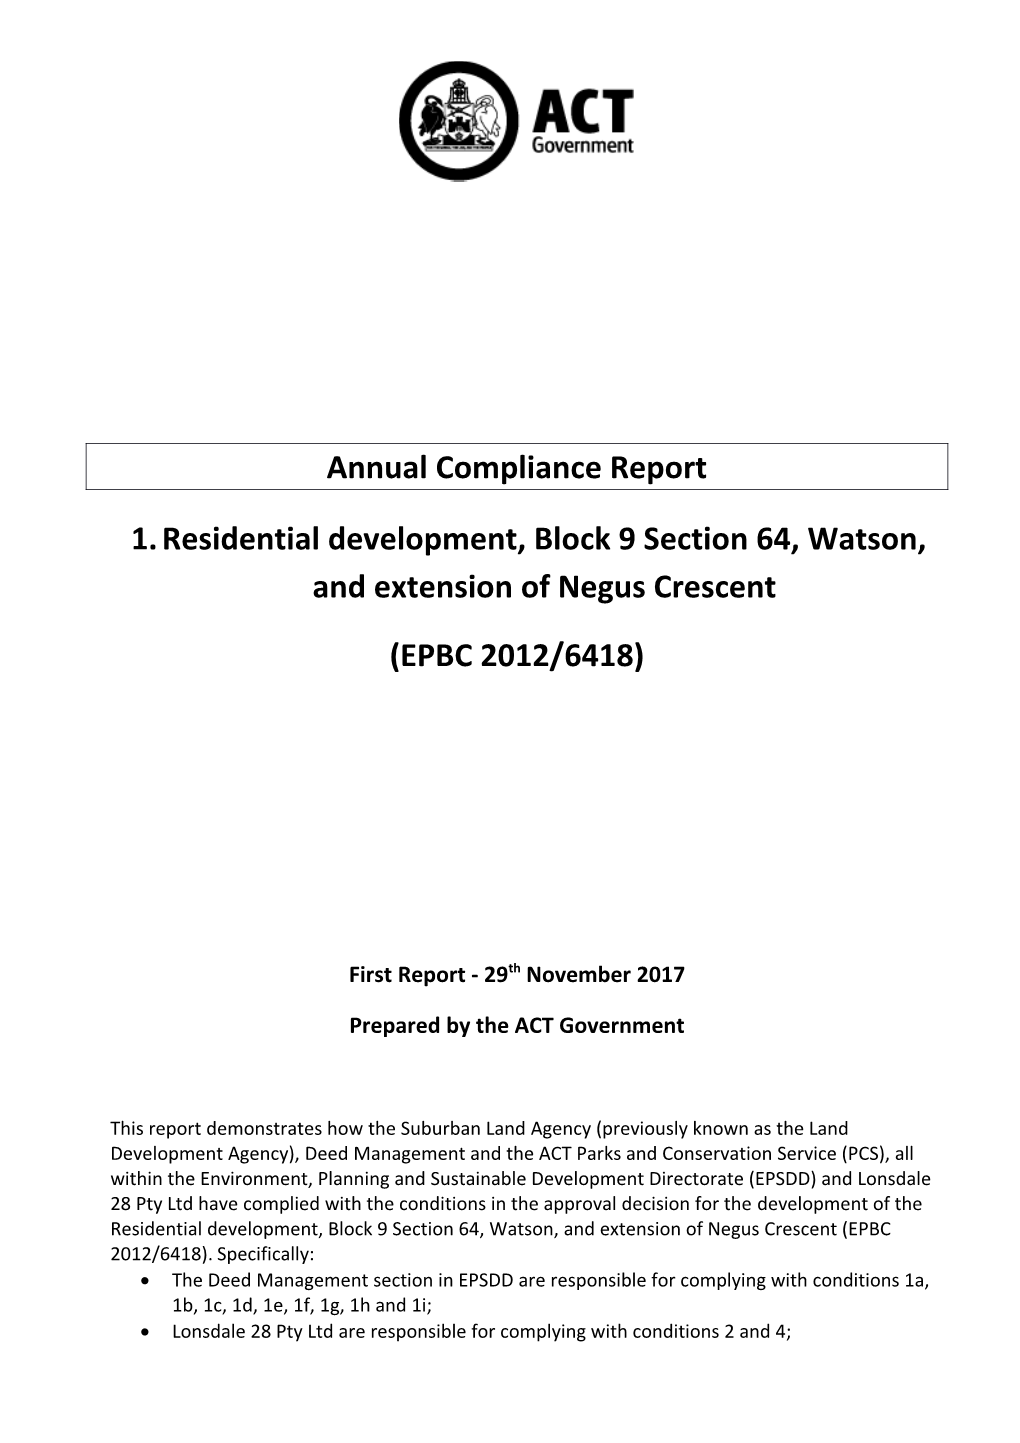 Annual Compliance Report - Residential Development, Block 9 Section 64, Watson, and Extension